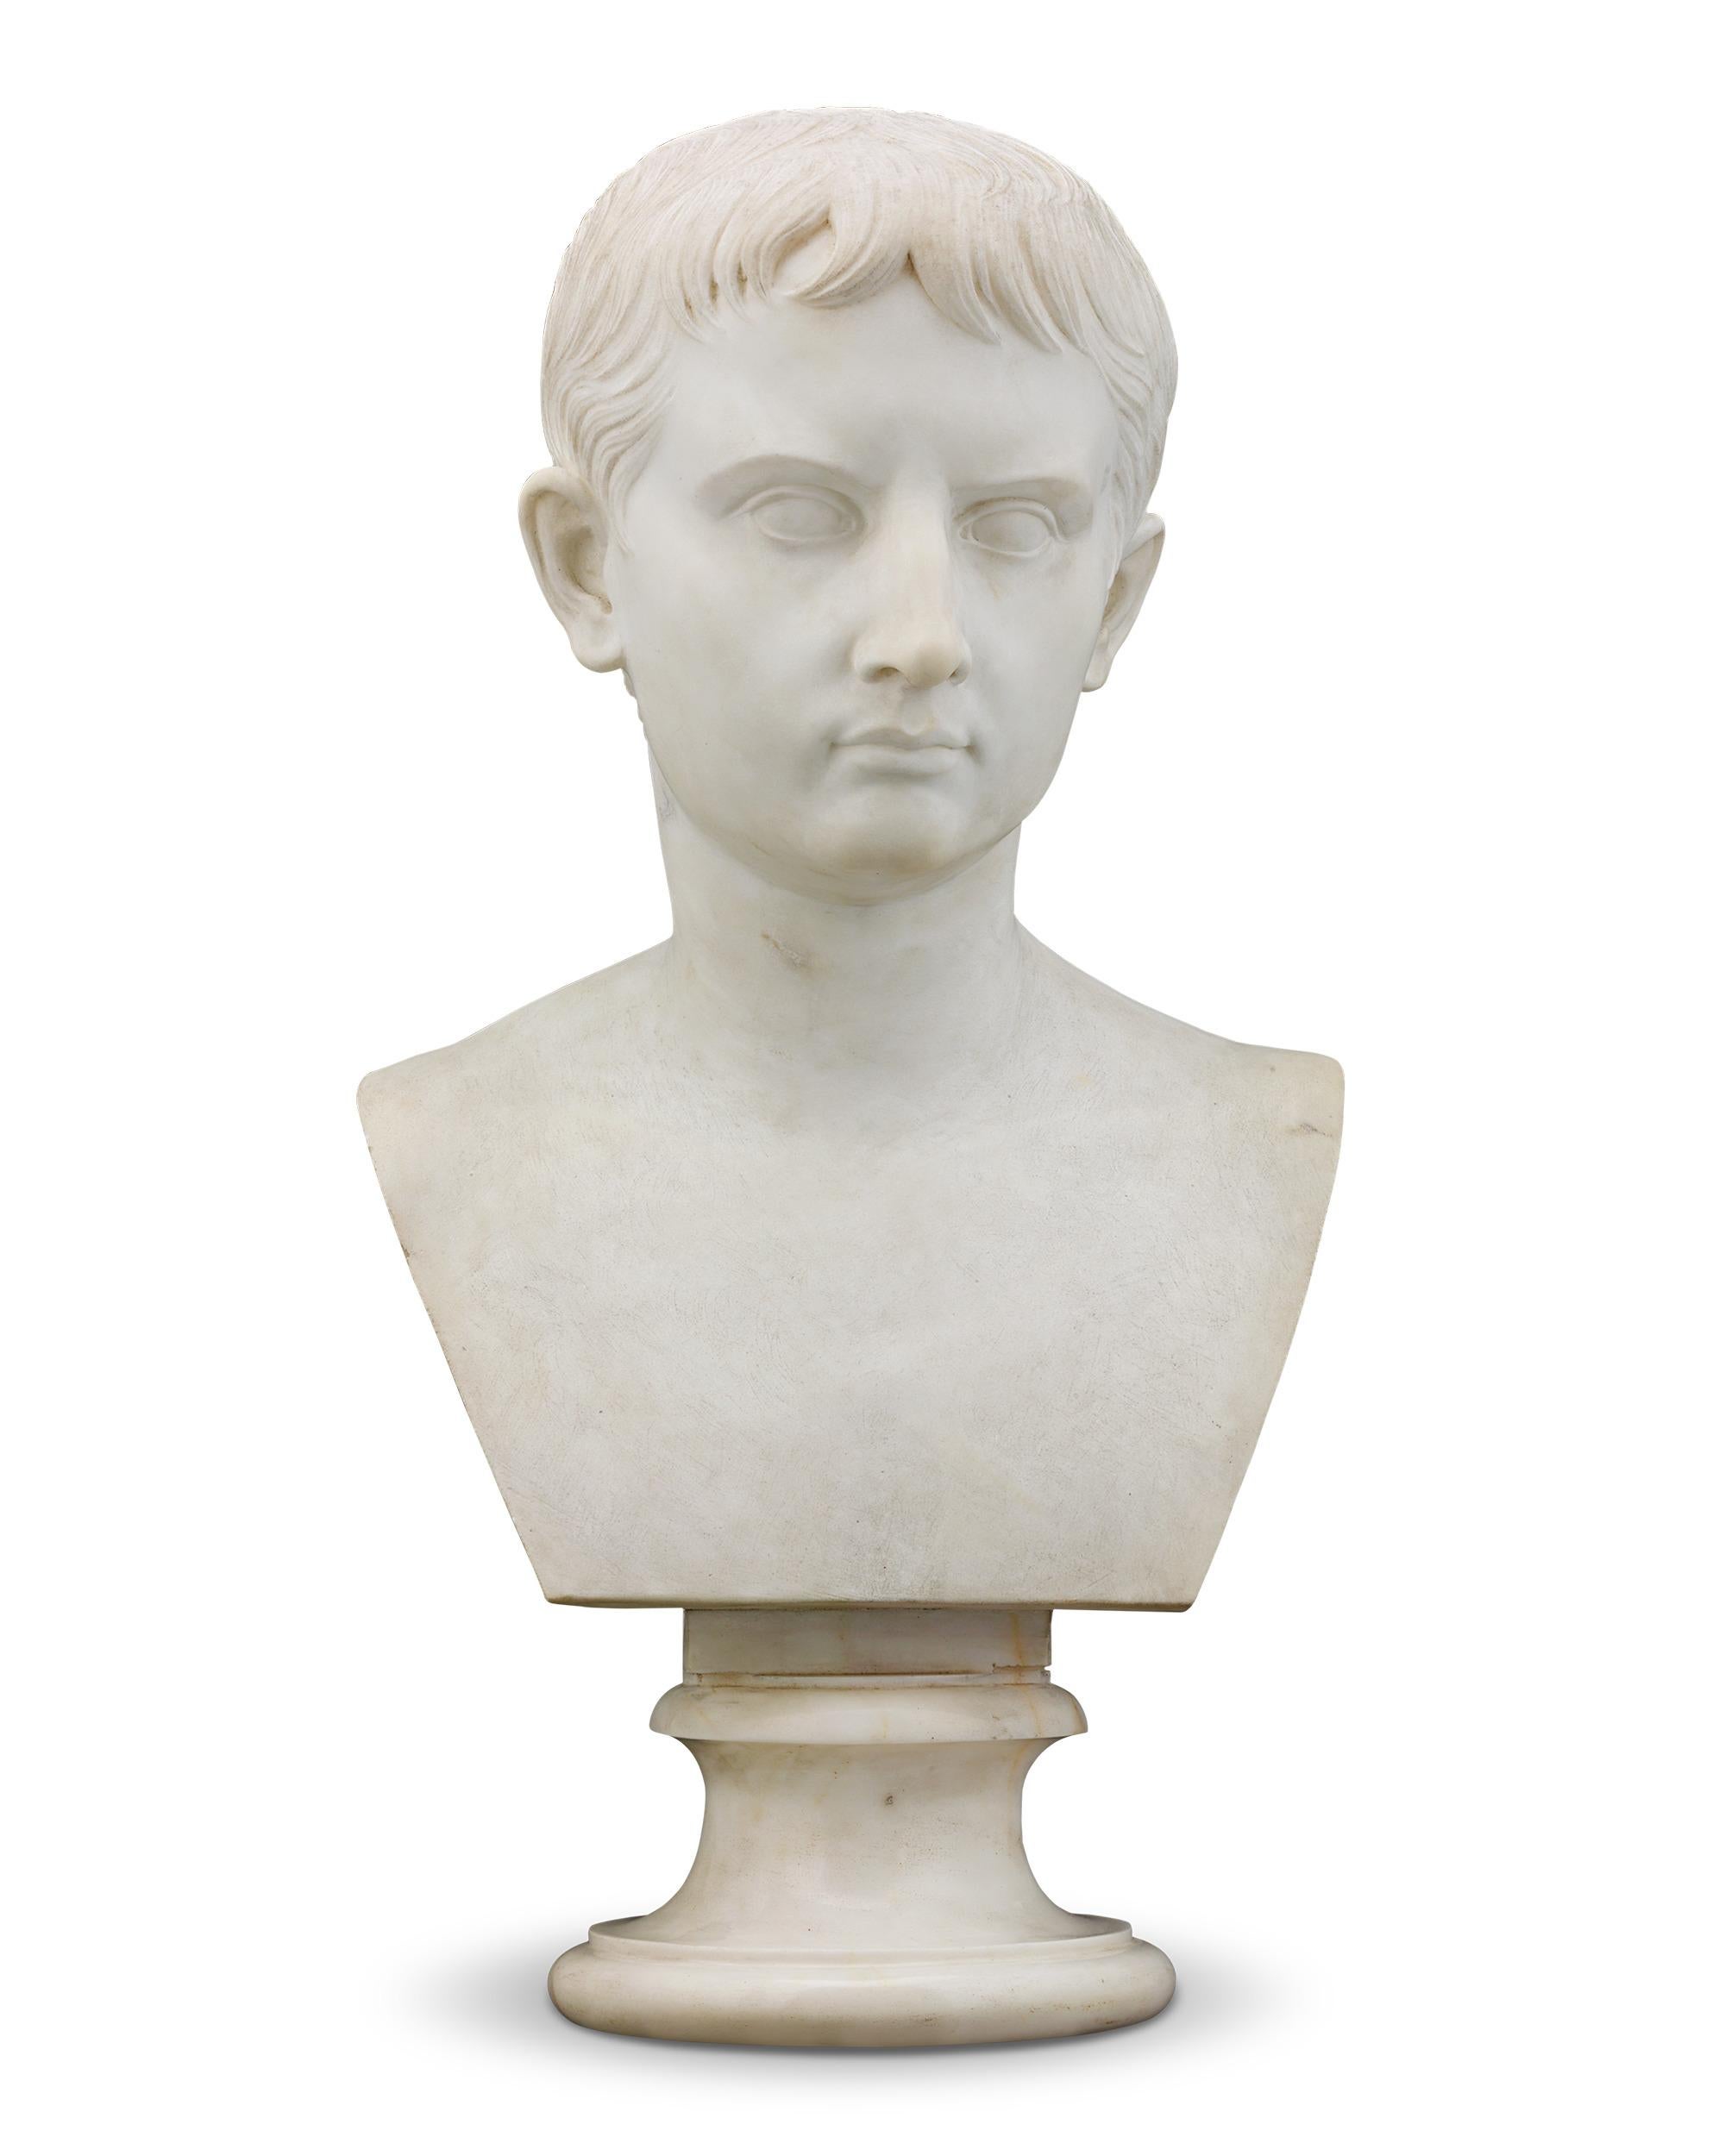 Augustus Saint-Gaudens
1848-1907  American

Young Emperor Augustus

Marble

This extraordinary marble bust by revered American sculptor Augustus Saint-Gaudens is crafted in the classical style of the Greco-Roman world, with the perfect proportions